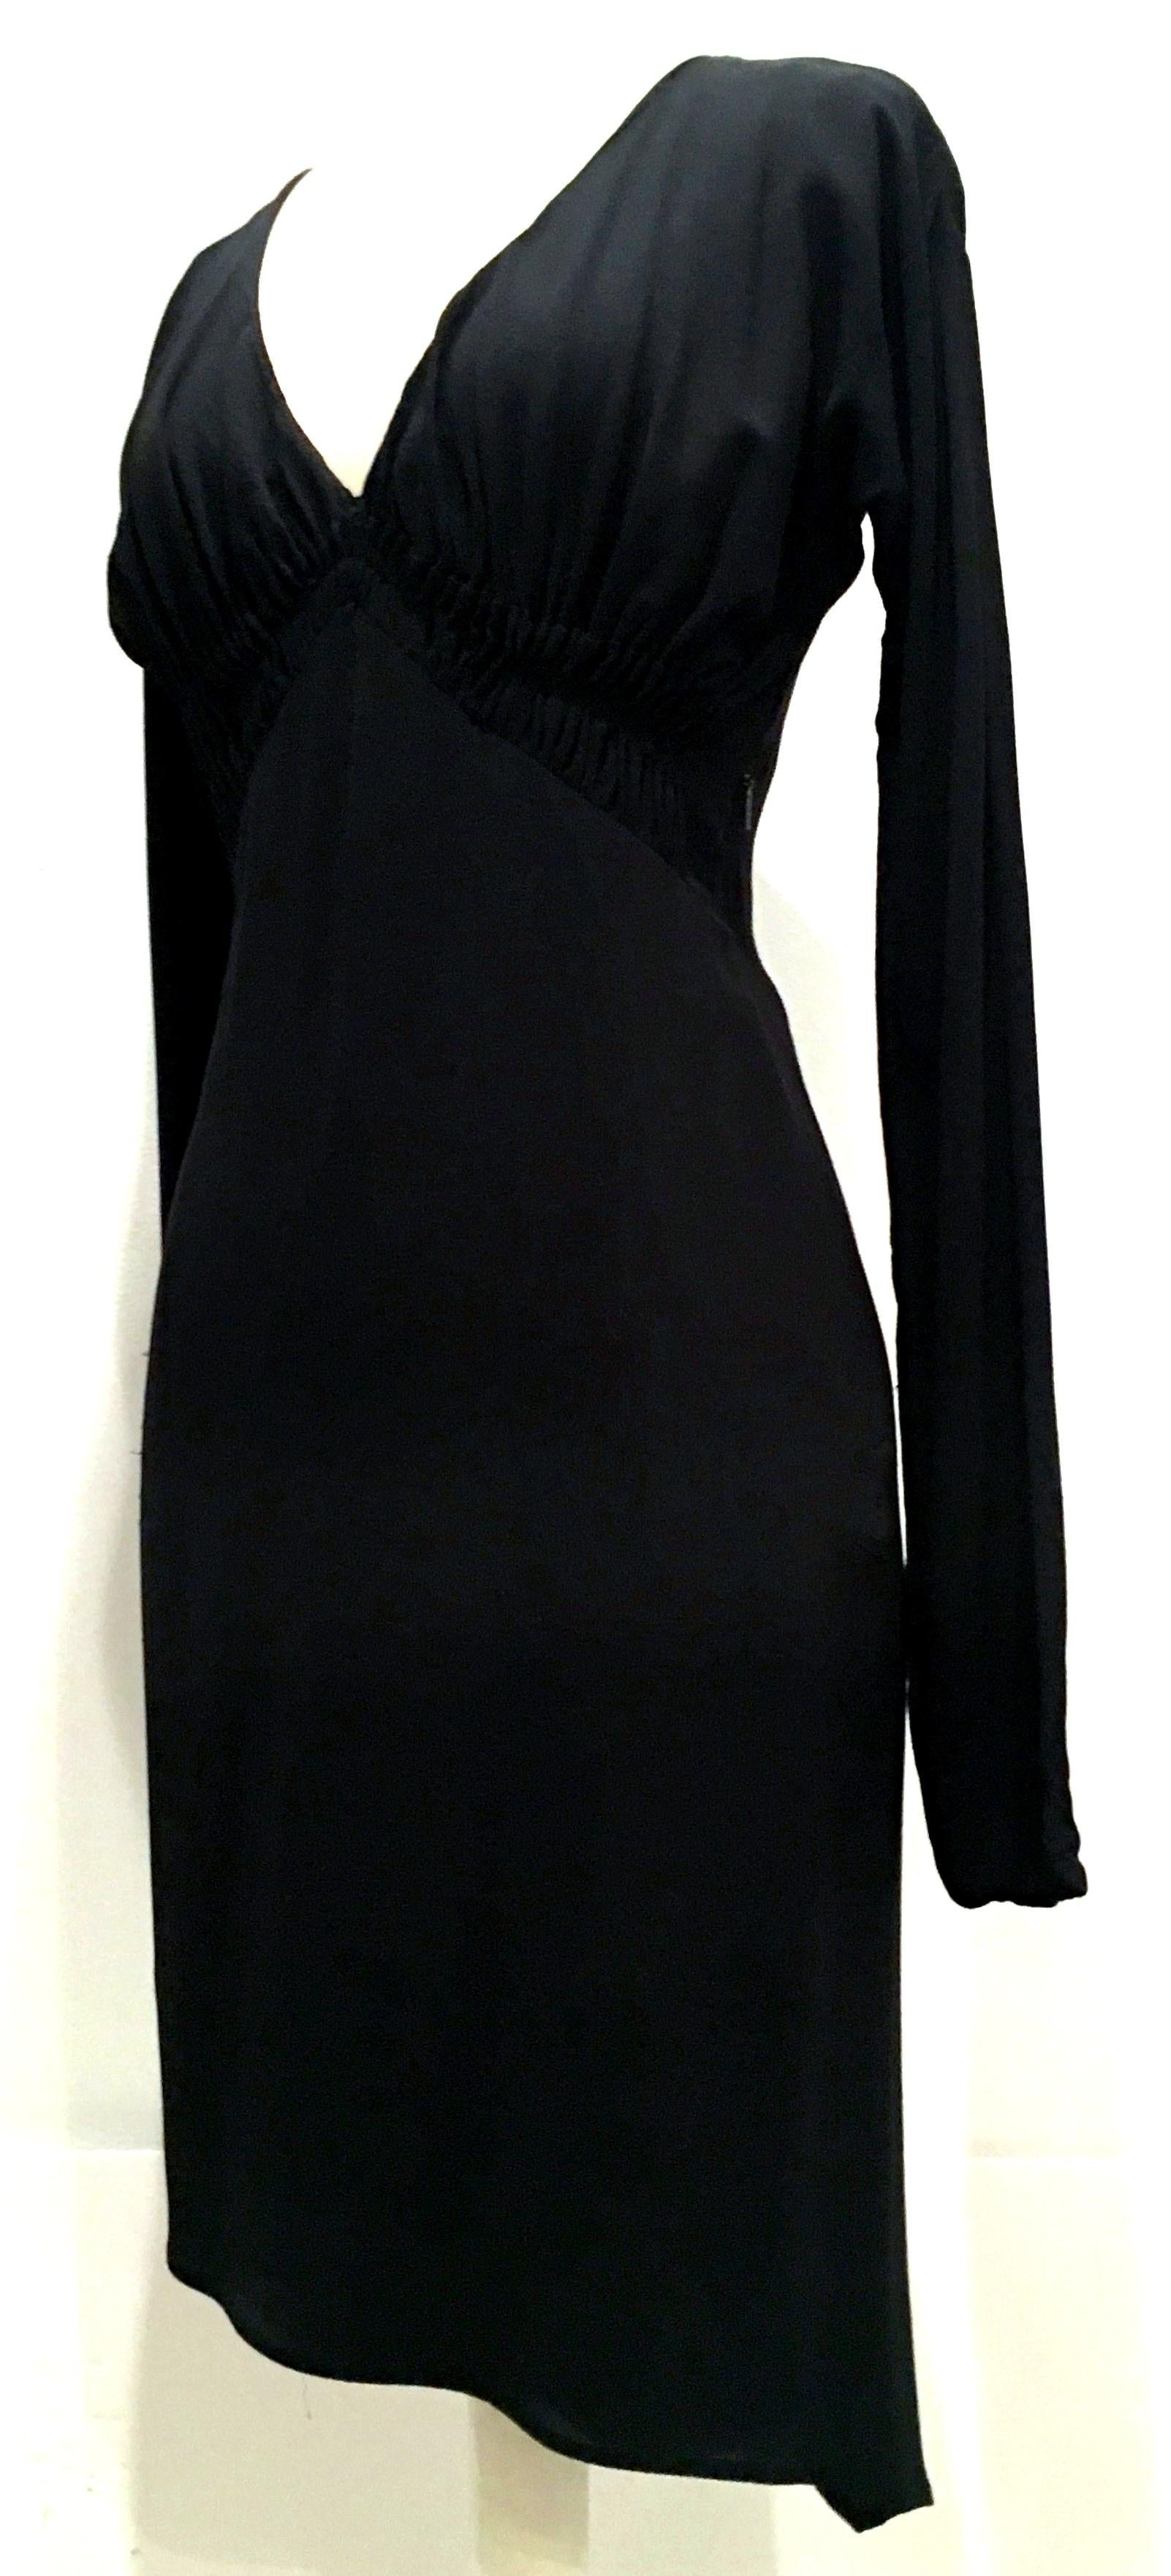 Women's or Men's 2003 Italian Silk Long Sleeve Deep Plunge Black Dress By Tom Ford For Gucci-42 For Sale